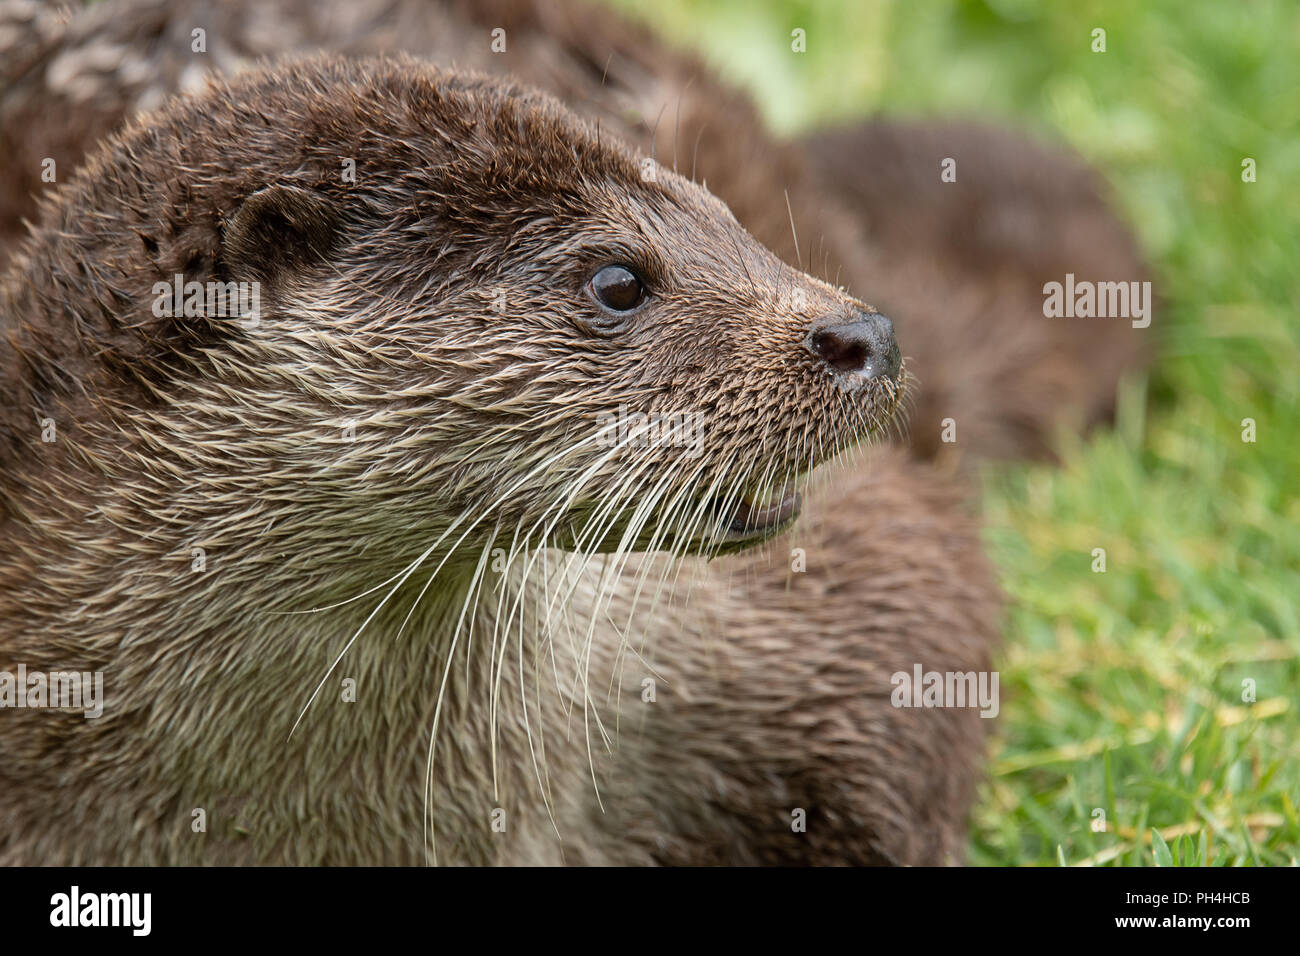 A close up side profile portrait of an otter. The animal is facing to the right. The portrait shows the head with detailed whiskers Stock Photo